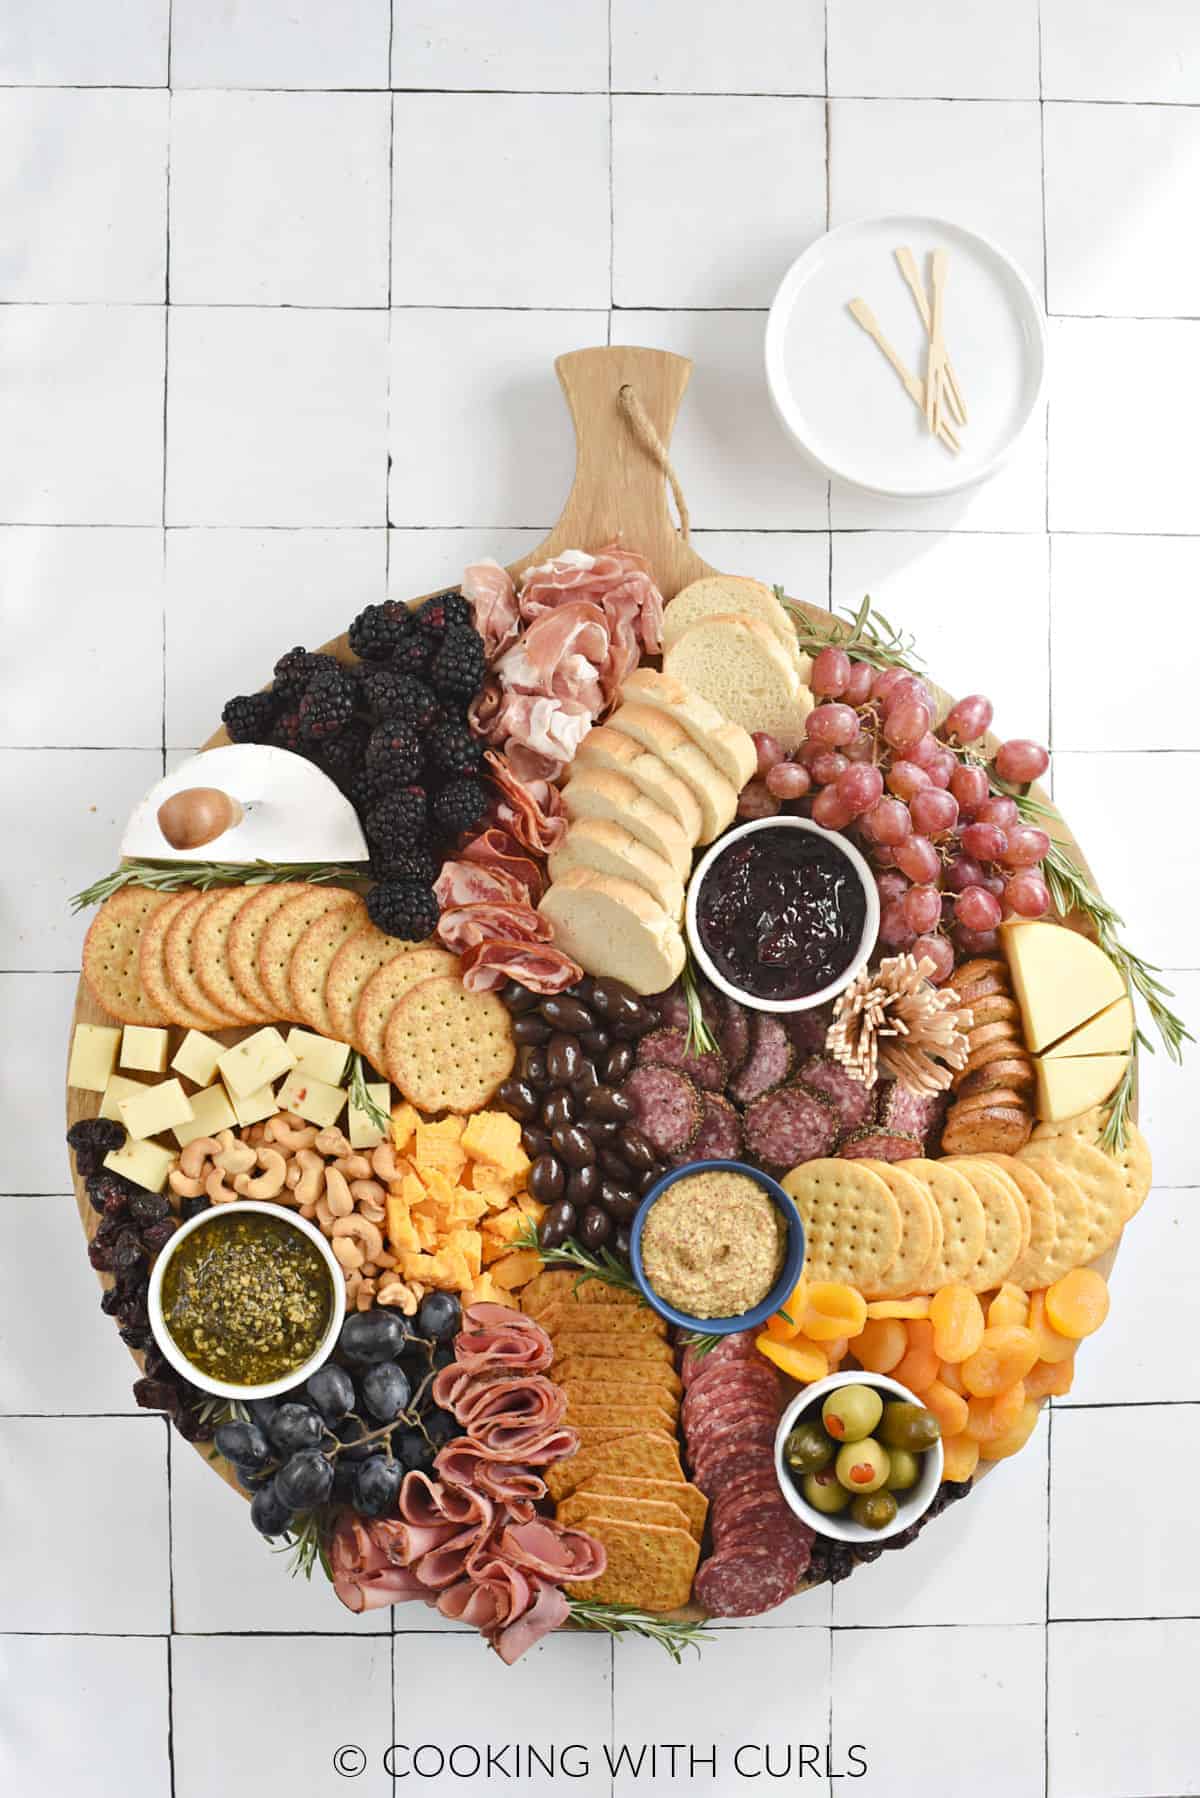 A large round board topped with slices of meats, cheeses, bread, crackers, dried apricots and cherries, grapes, and nuts.